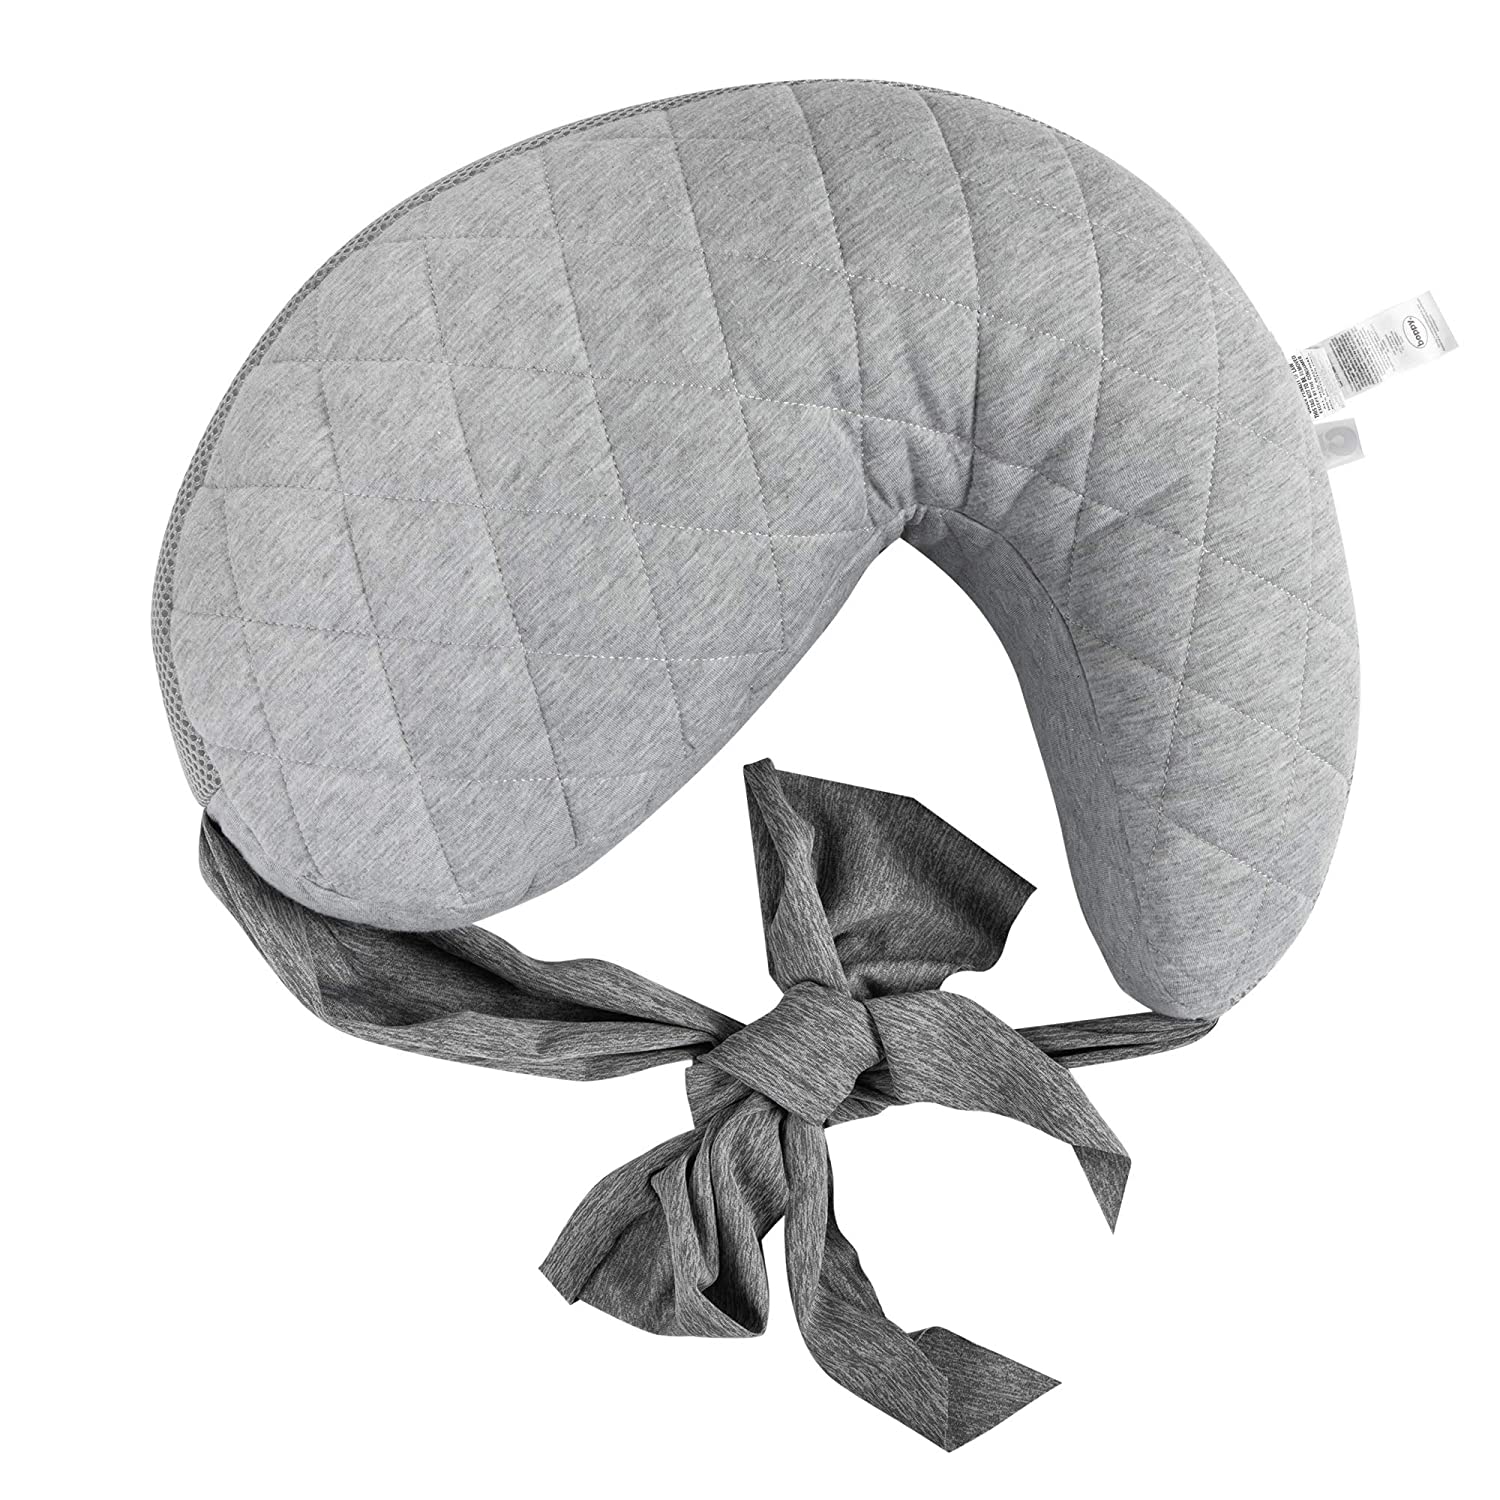 Boppy nursing pillow for travel with baby